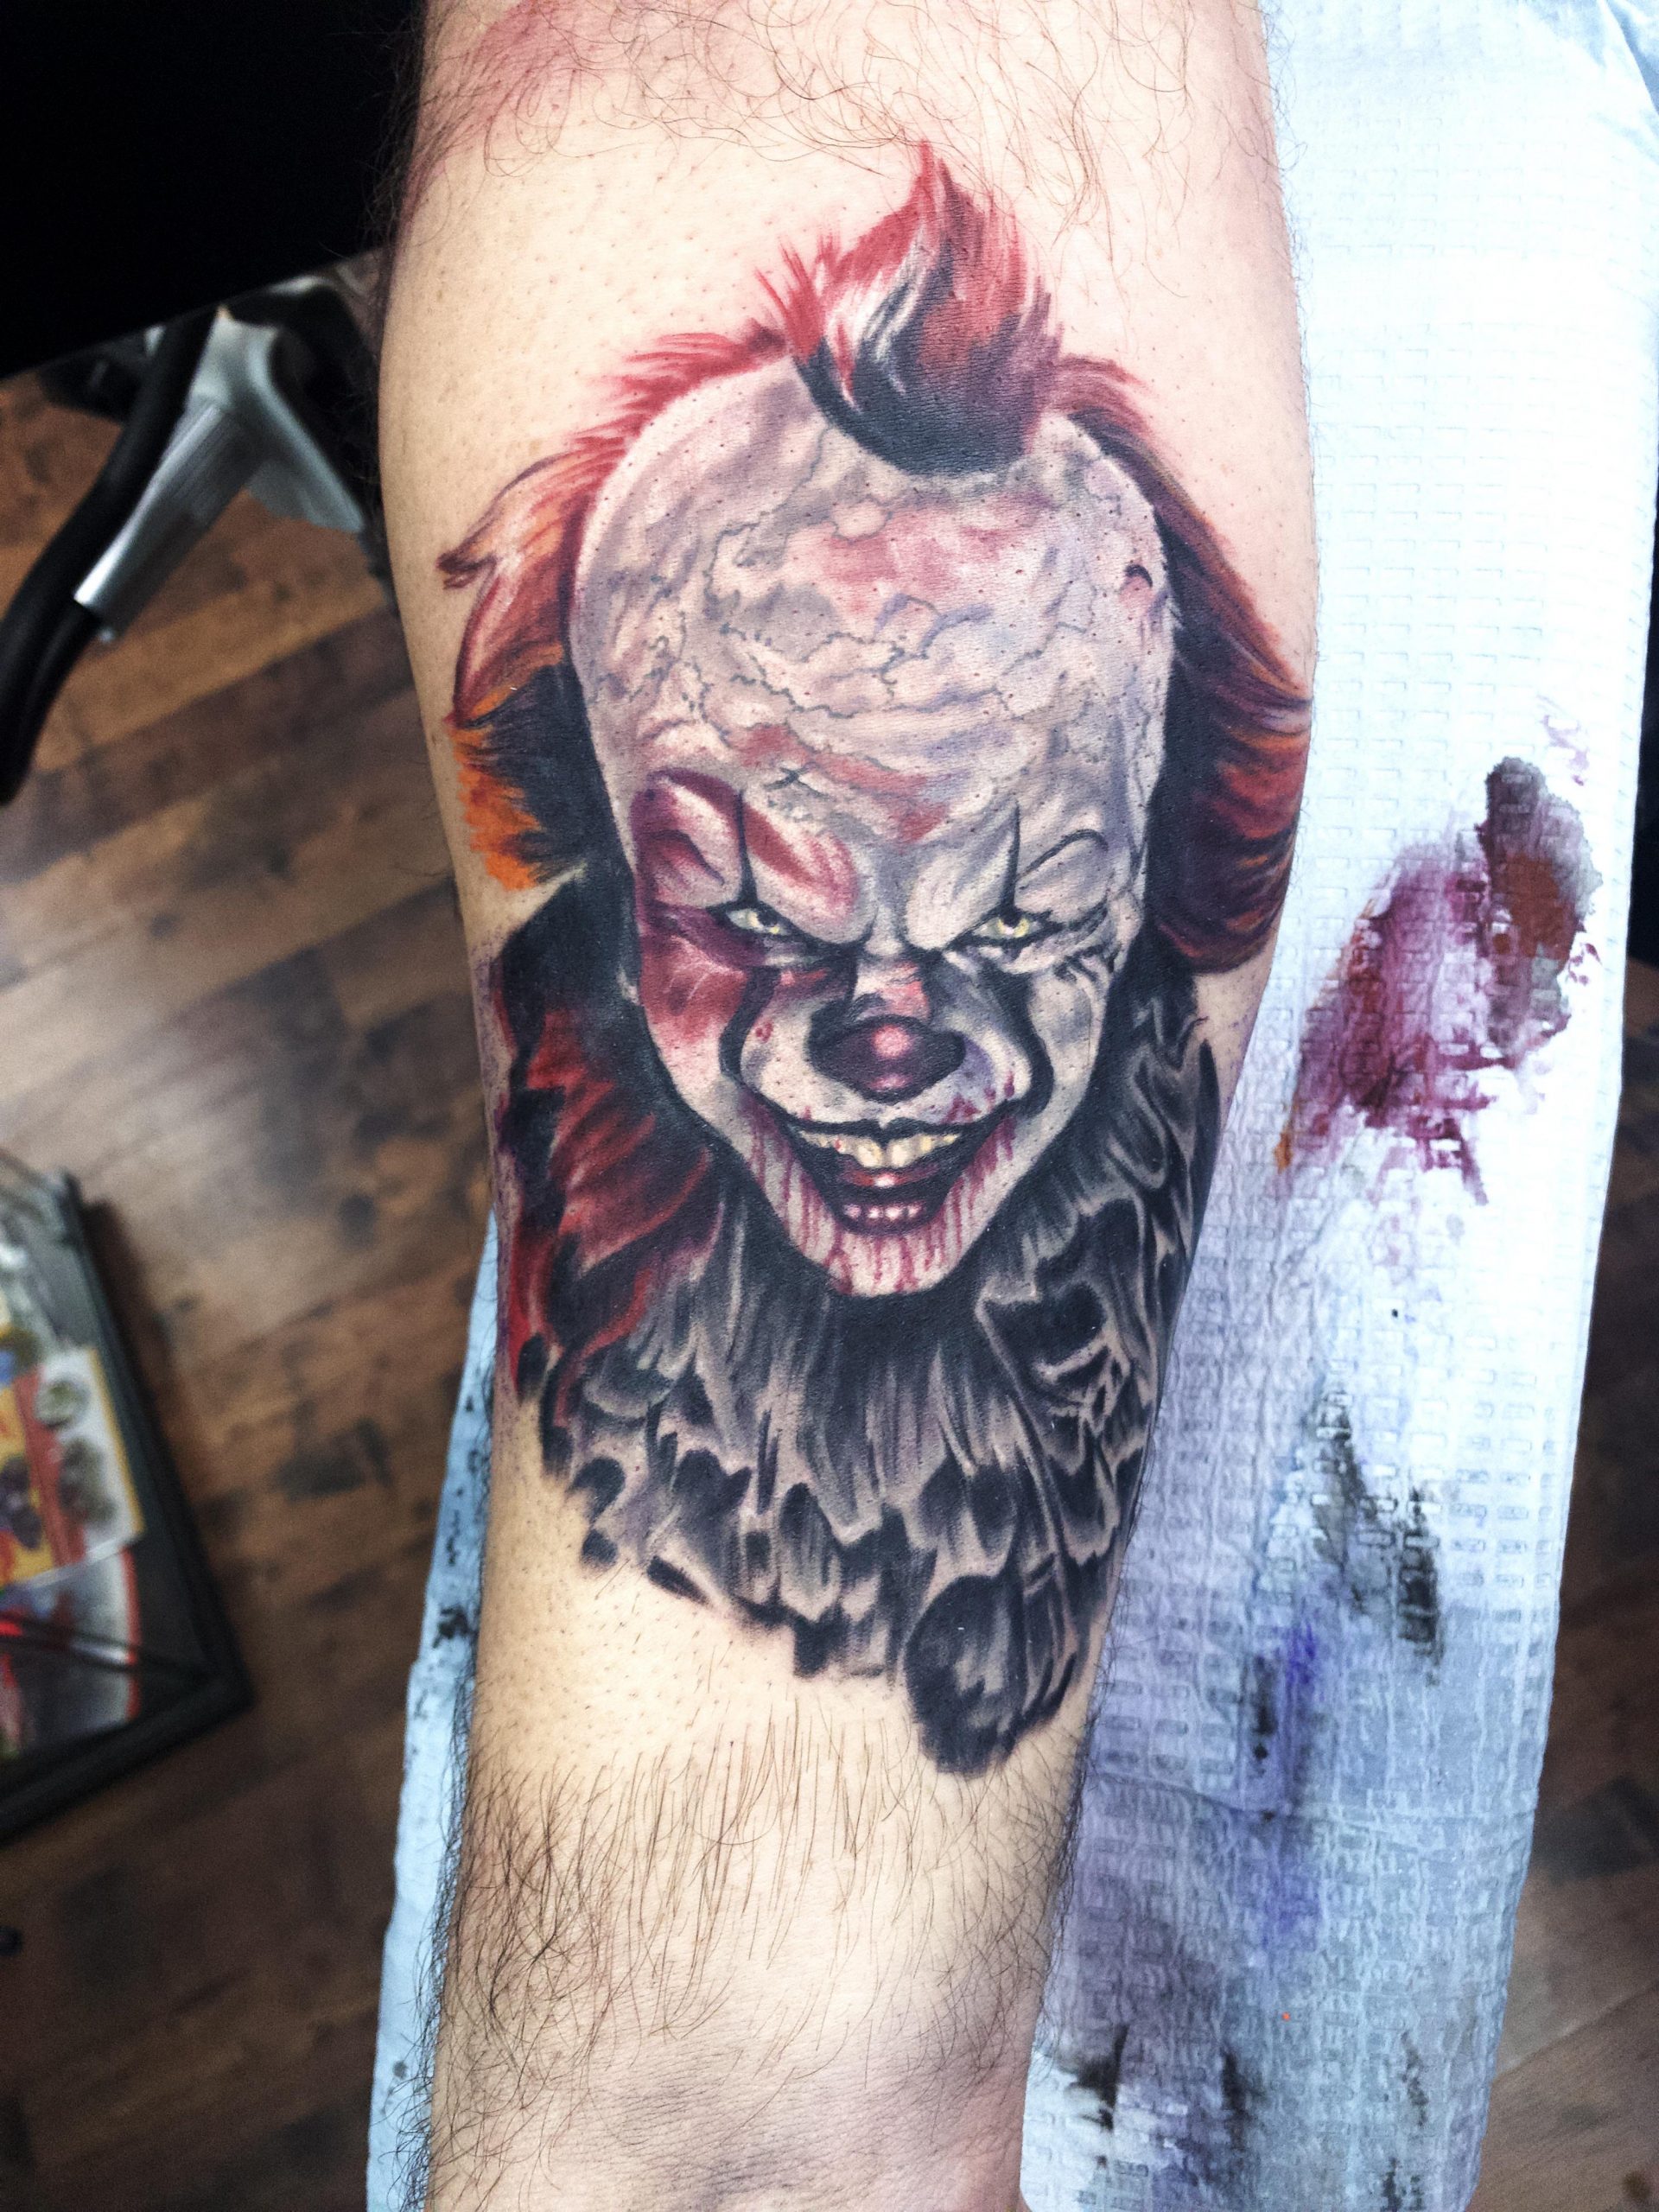 Super Fun Pennywise Tattoo I Did About 6-7 Months Ago Before The Covid Hit